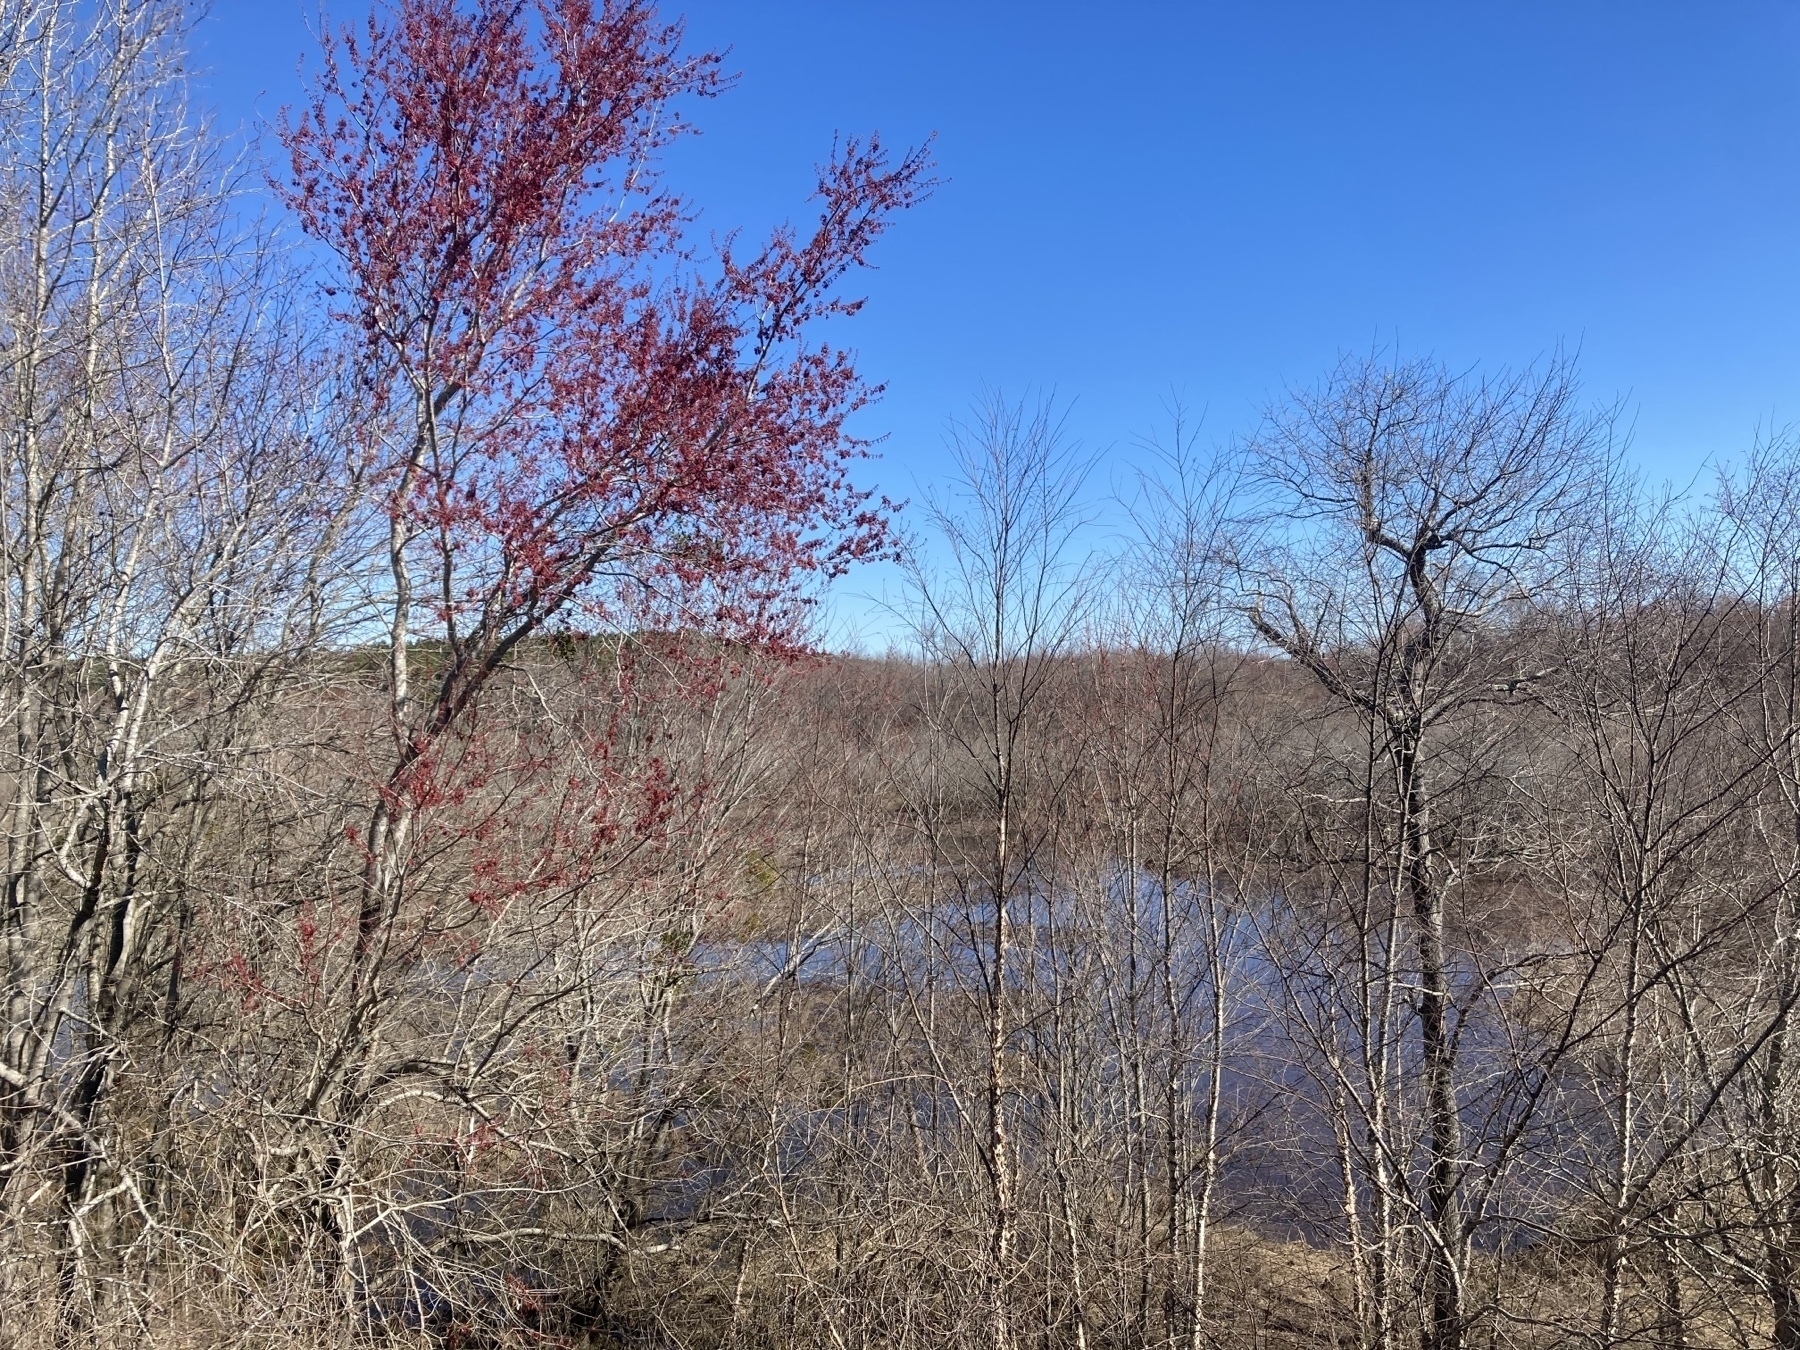 maple tree blooming red, bare trees in background, blue sky